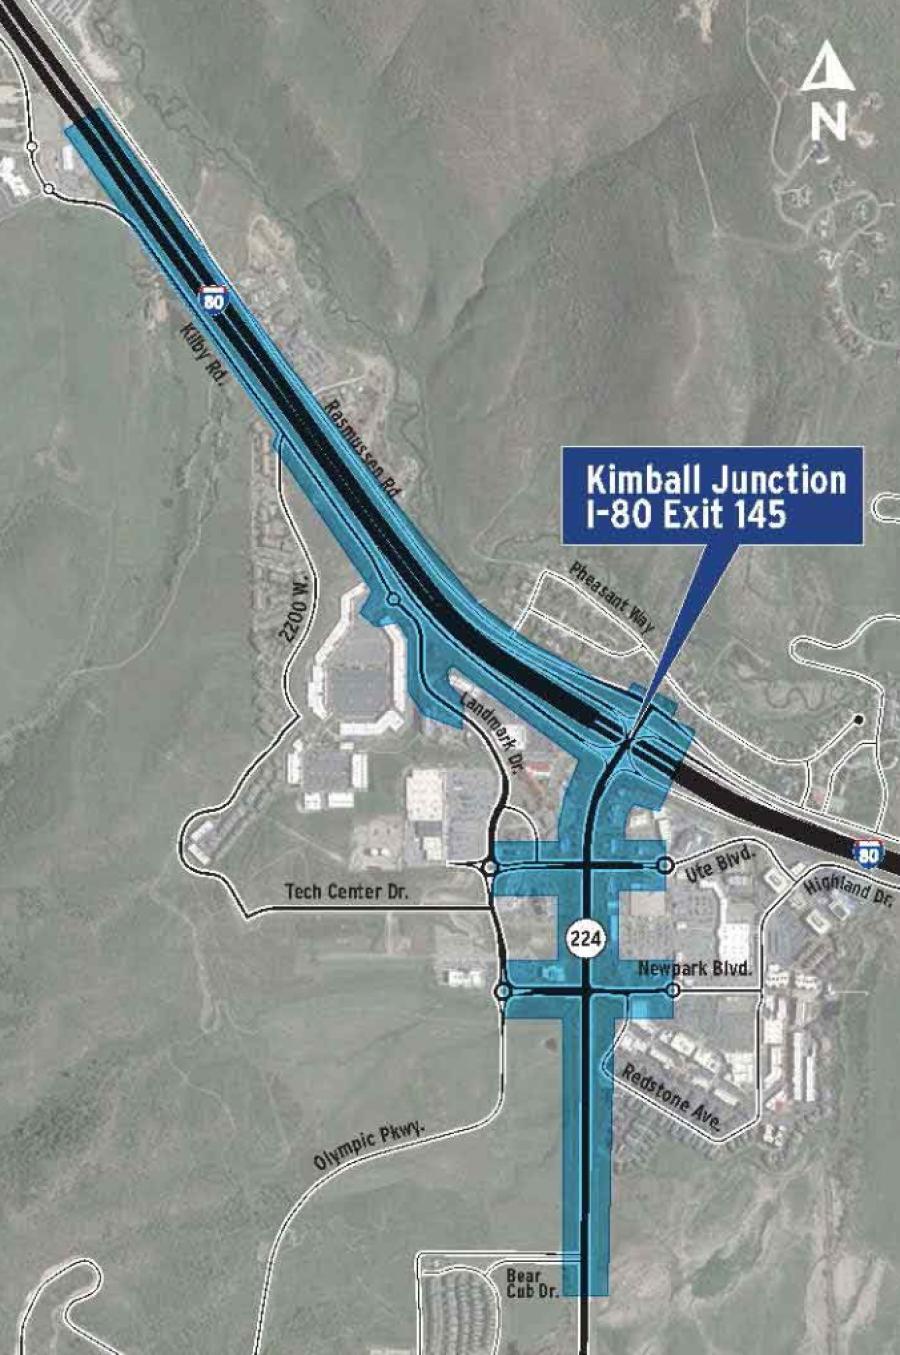 UDOT is preparing this study to evaluate improvements at the I-80 and SR 224 interchange at Kimball Junction and on SR 224 from Kimball Junction through the Olympic Parkway intersection in Summit County.
(Photo courtesy of UDOT.)